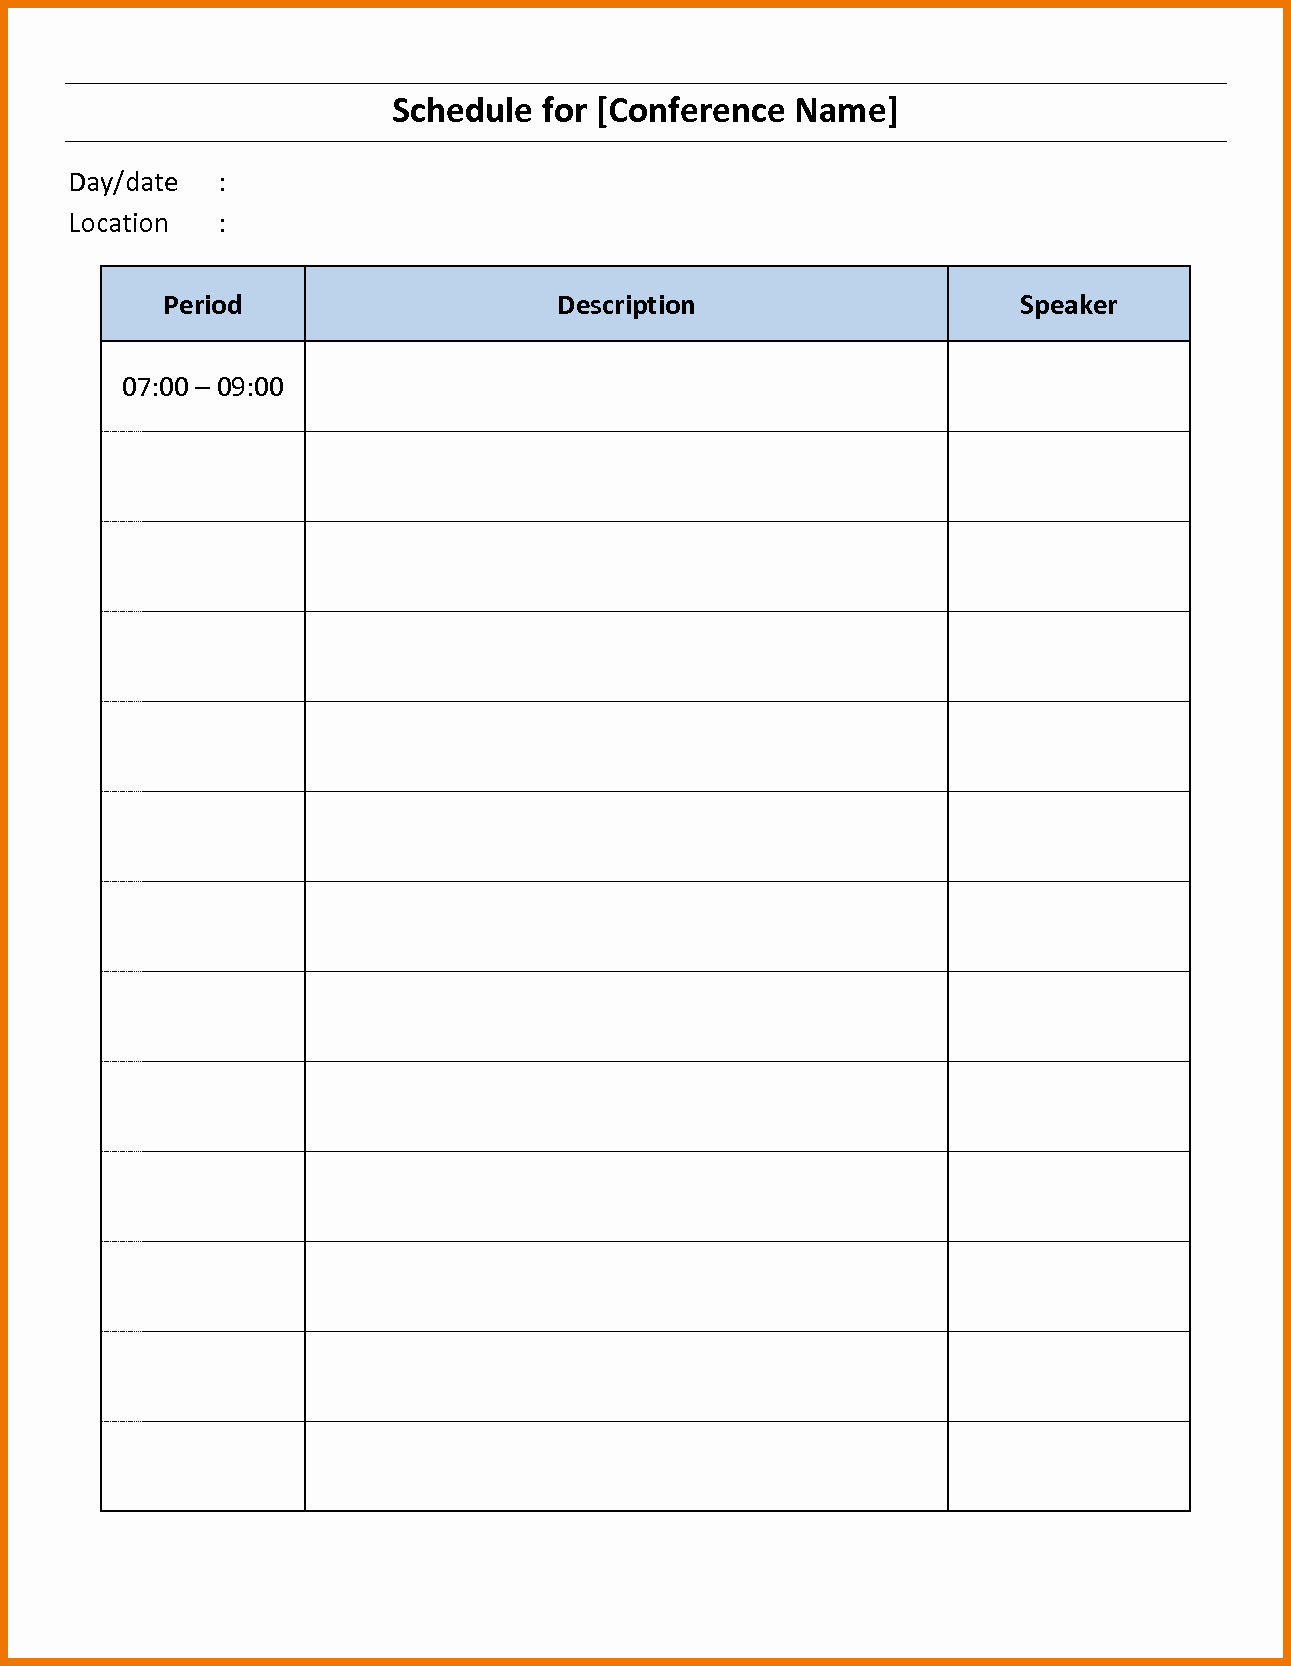 Daily Schedule Template Free Fresh Daily Itinerary Free Download Elsevier social Sciences